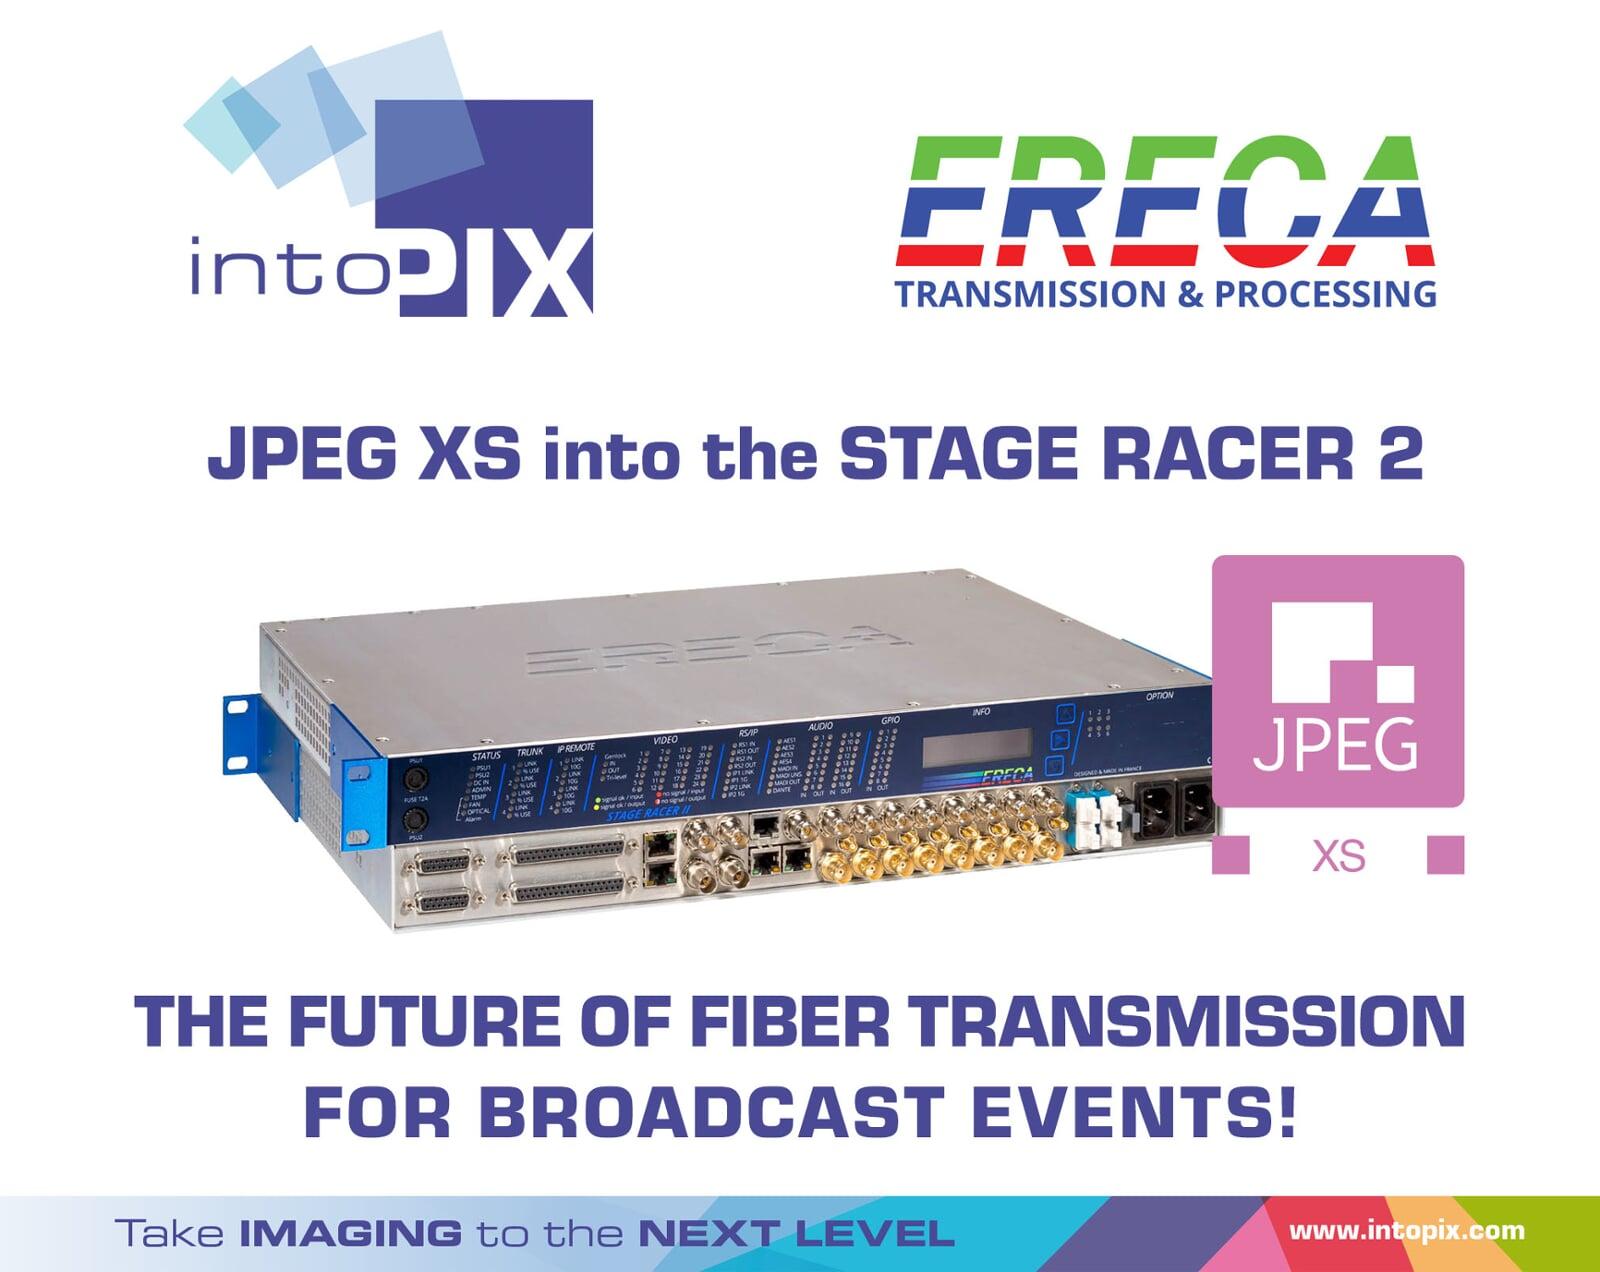 Introducing STAGE RACER 2 with intoPIX JPEG XS: The Future of Fiber Transmission for Broadcast Events